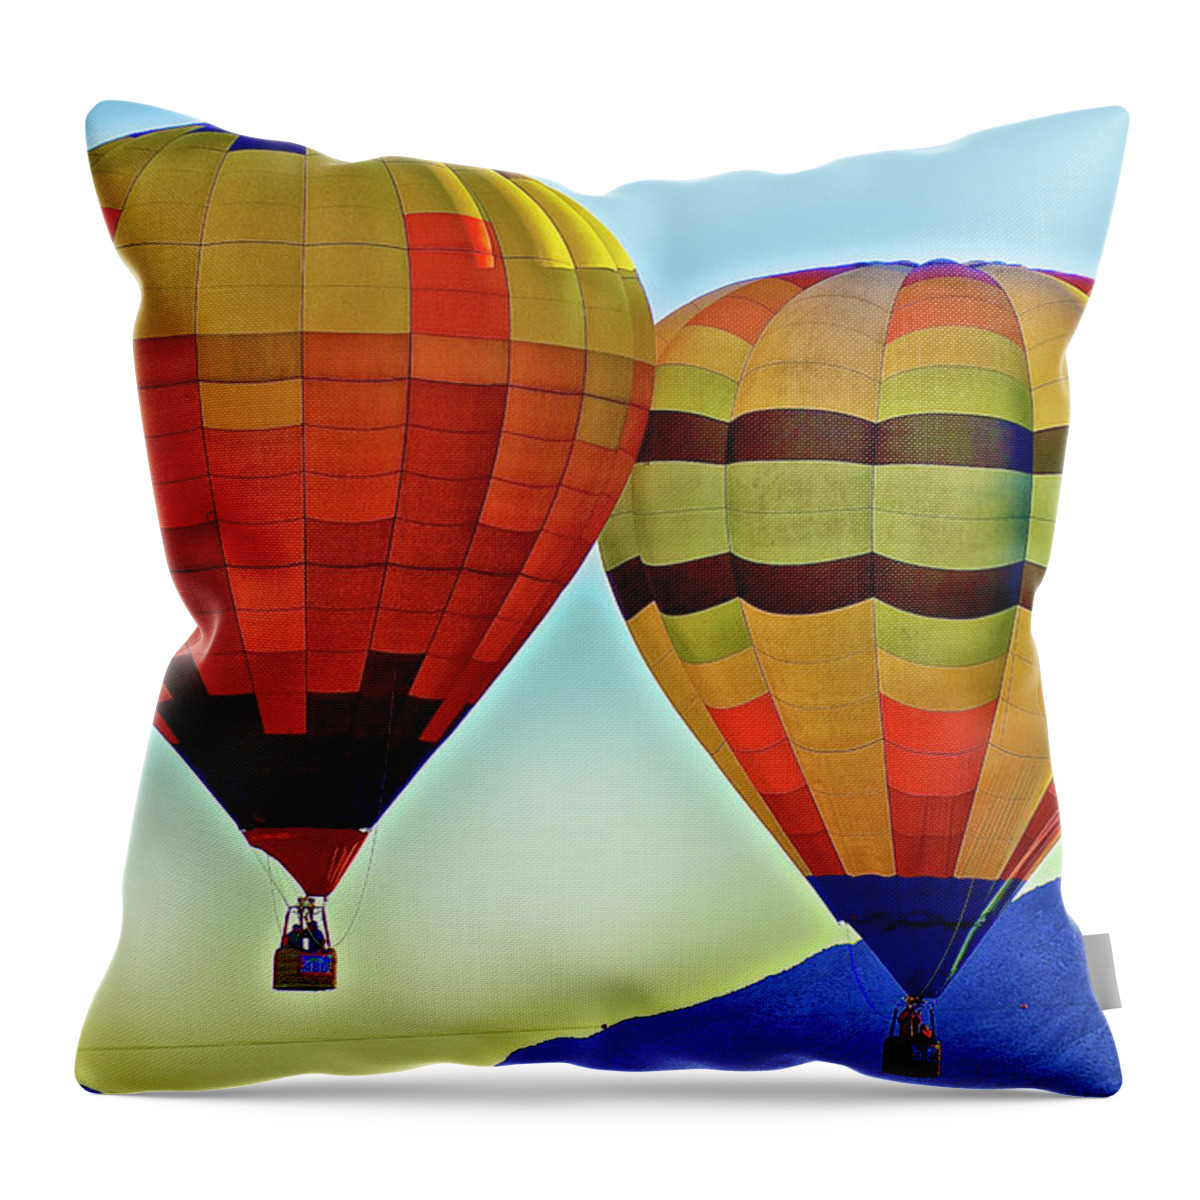 Albuquerque International Balloon Fiesta Throw Pillow featuring the photograph Mass Ascension of Balloons 1 by Donald Pash